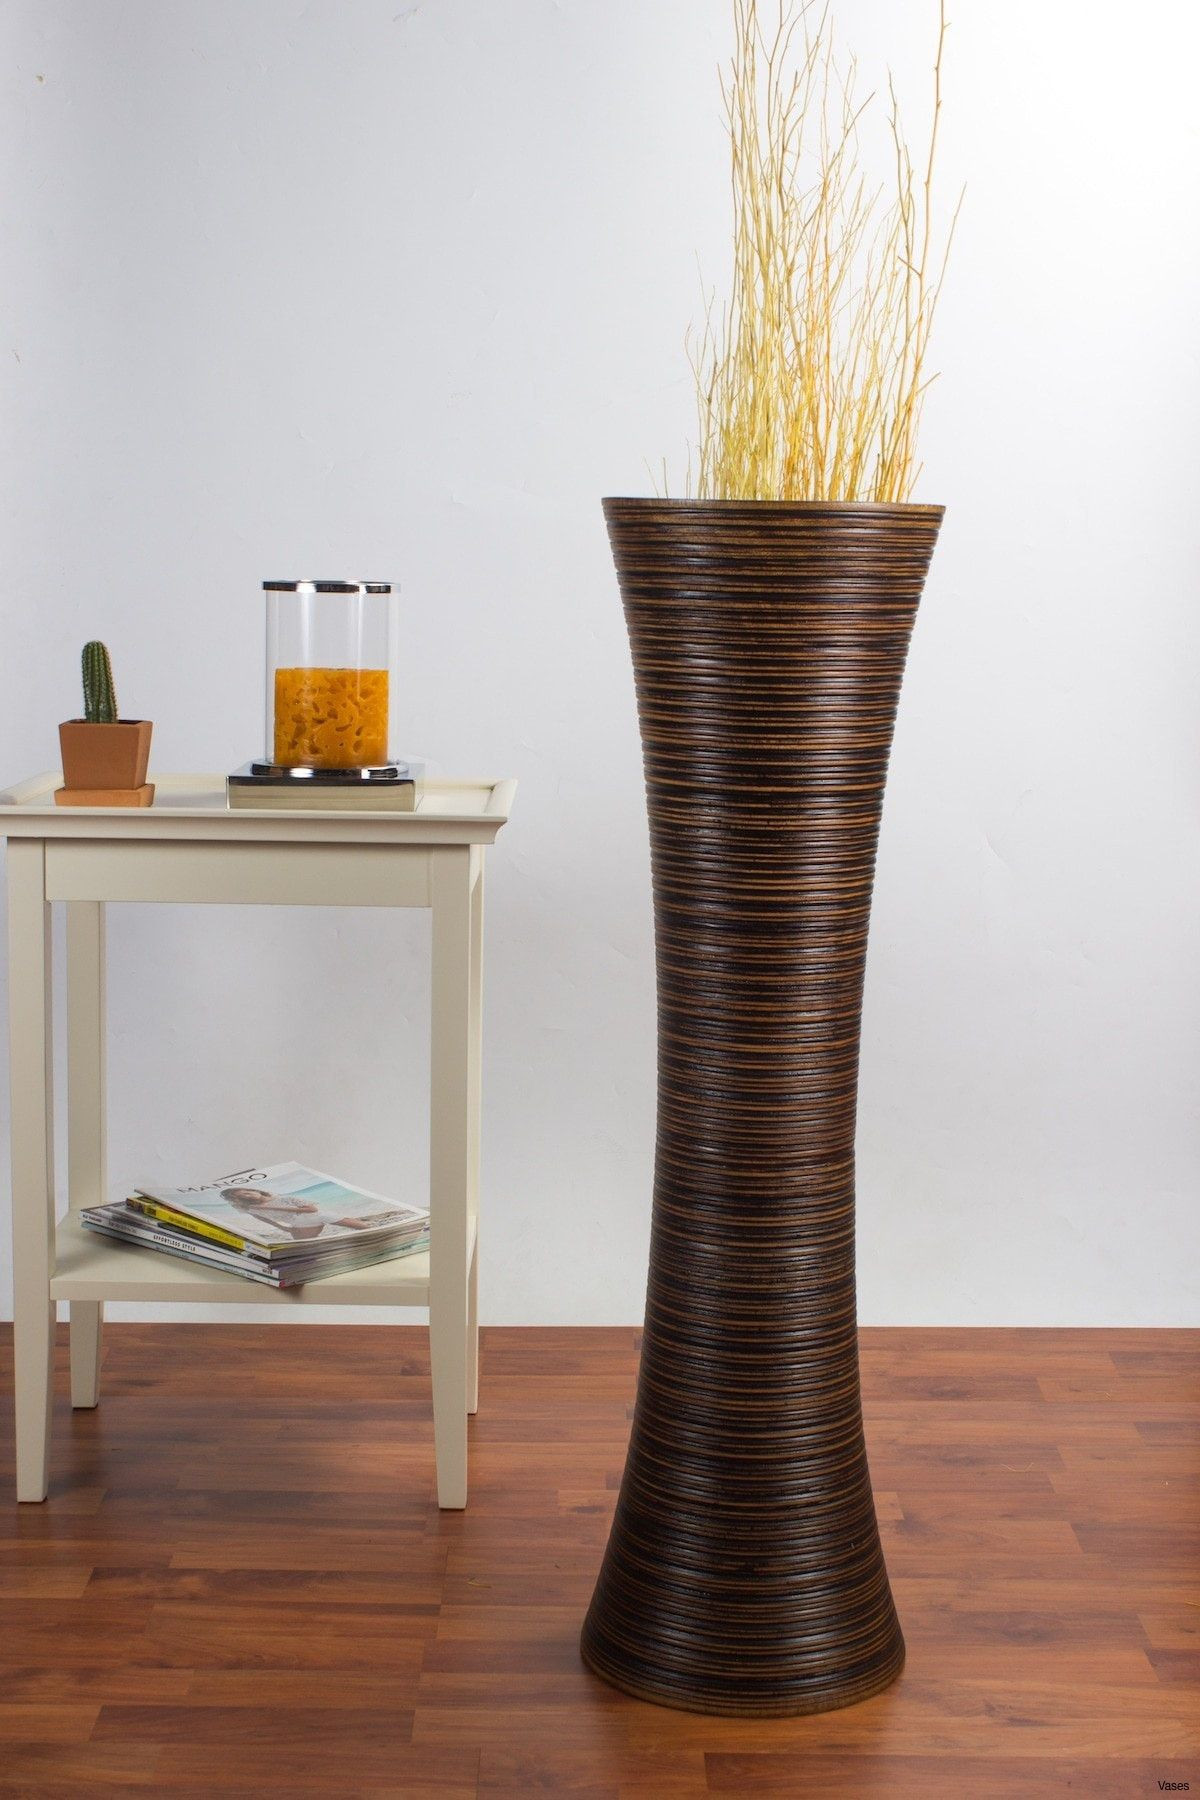 11 attractive Blue and Brown Decorative Vases 2024 free download blue and brown decorative vases of 30 large floor vase the weekly world pertaining to decorative floor vases fresh d dkbrw 5749 1h vases tall brown i 0d